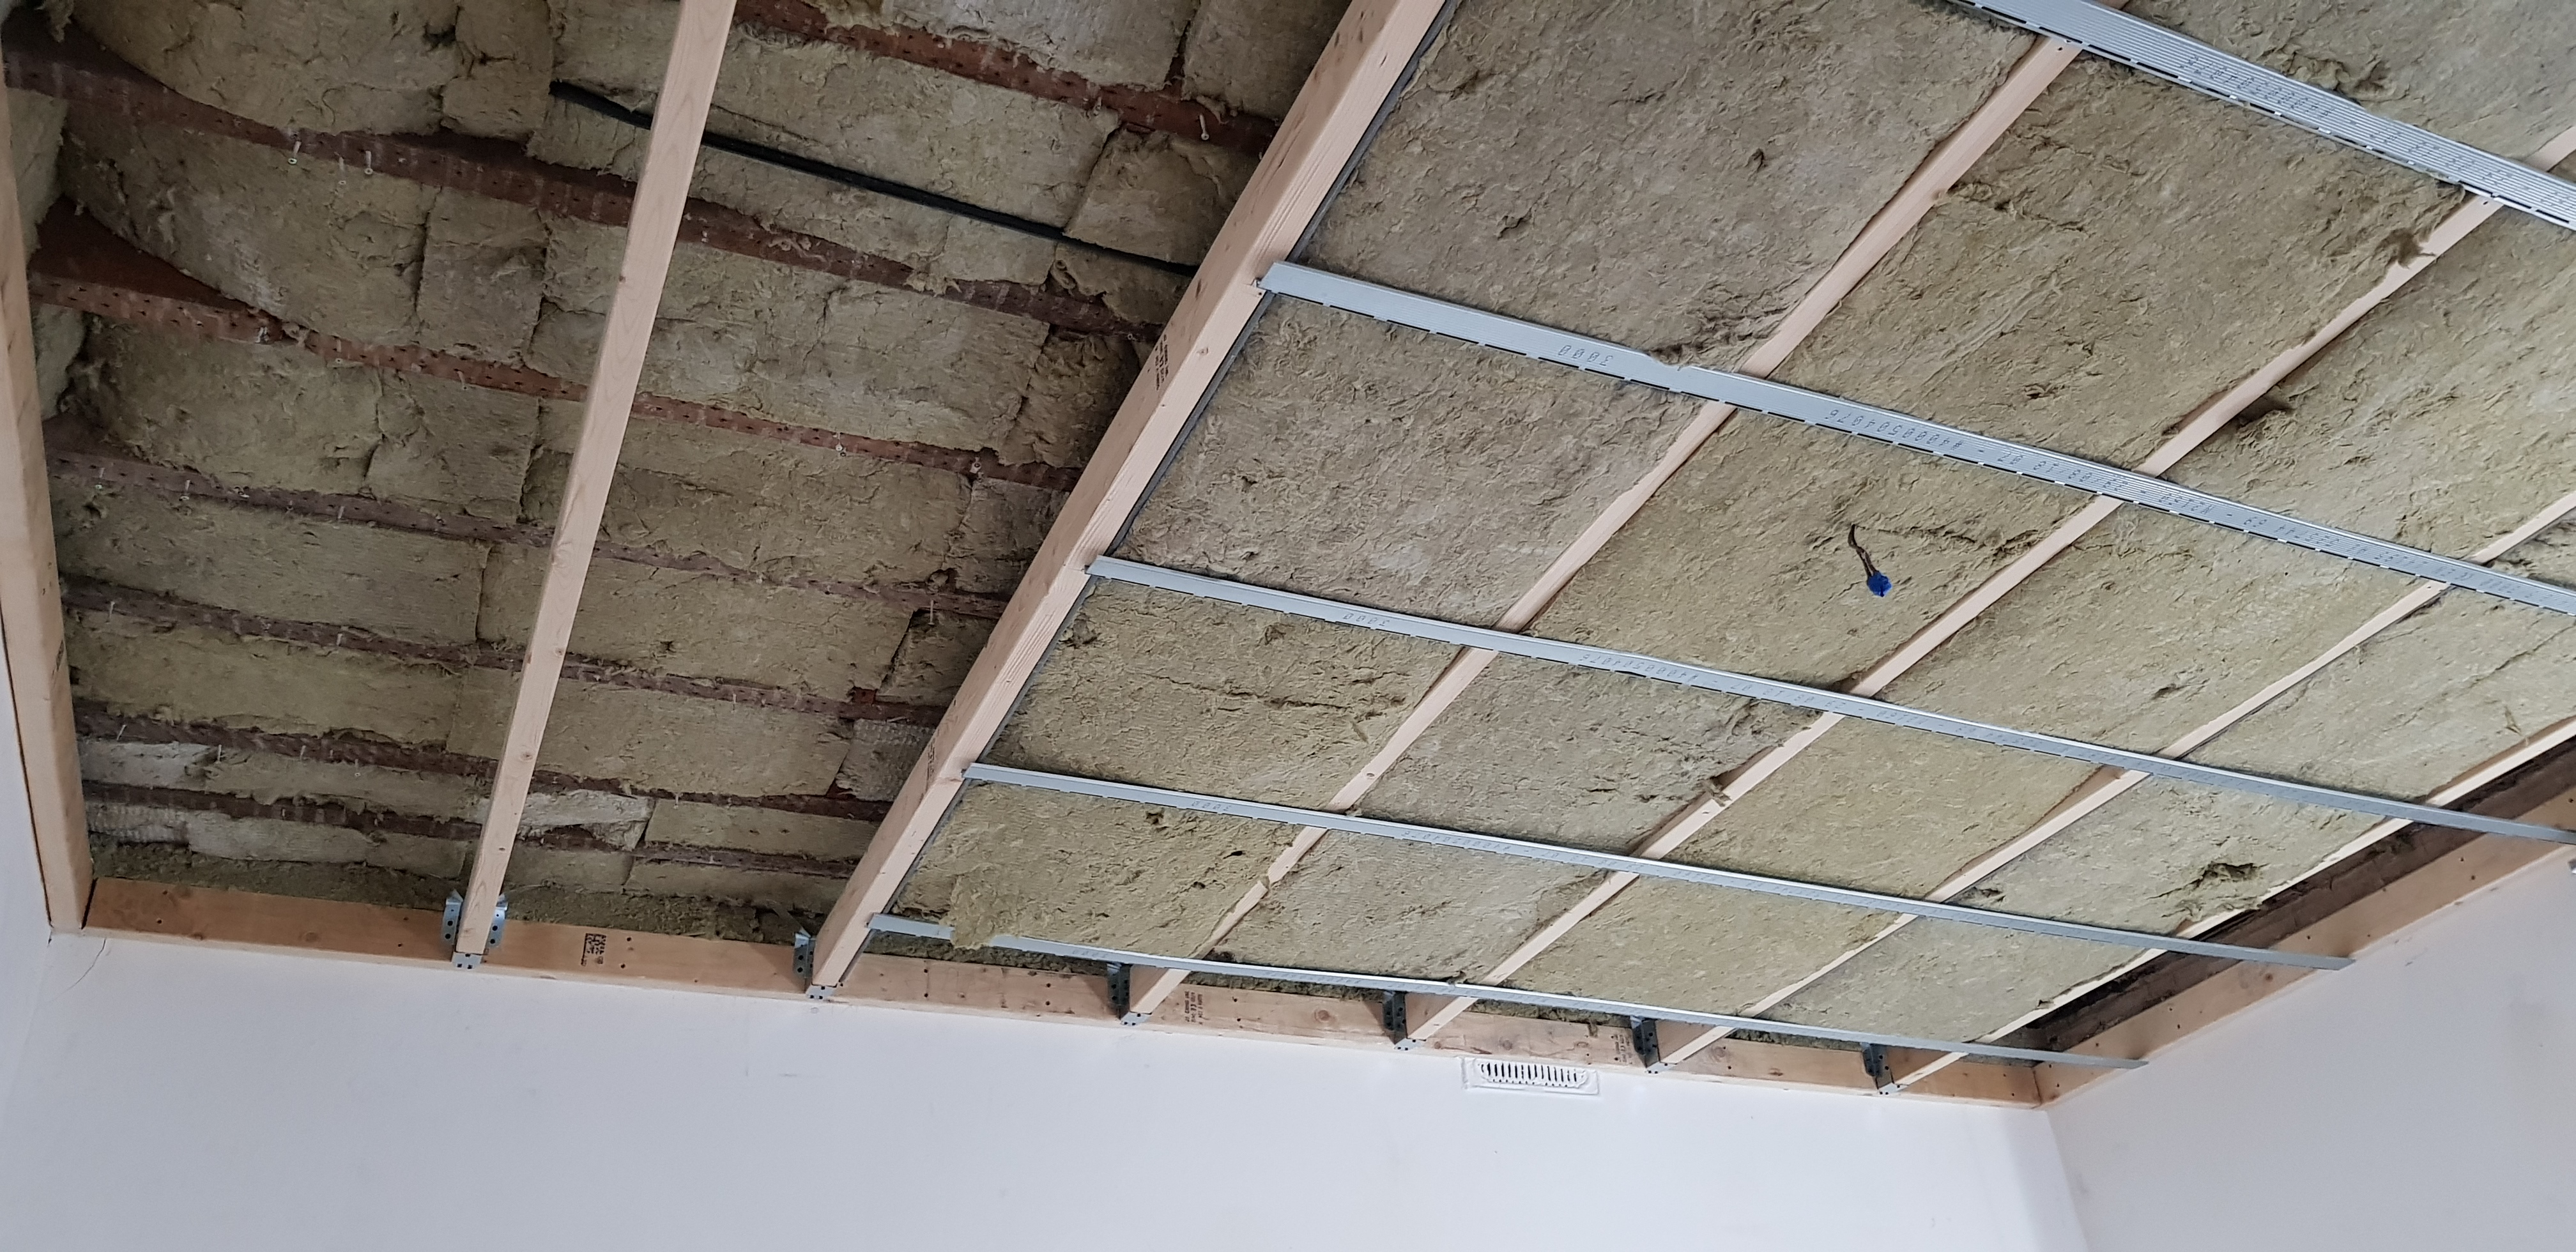 lath and plaster ceiling asbestos